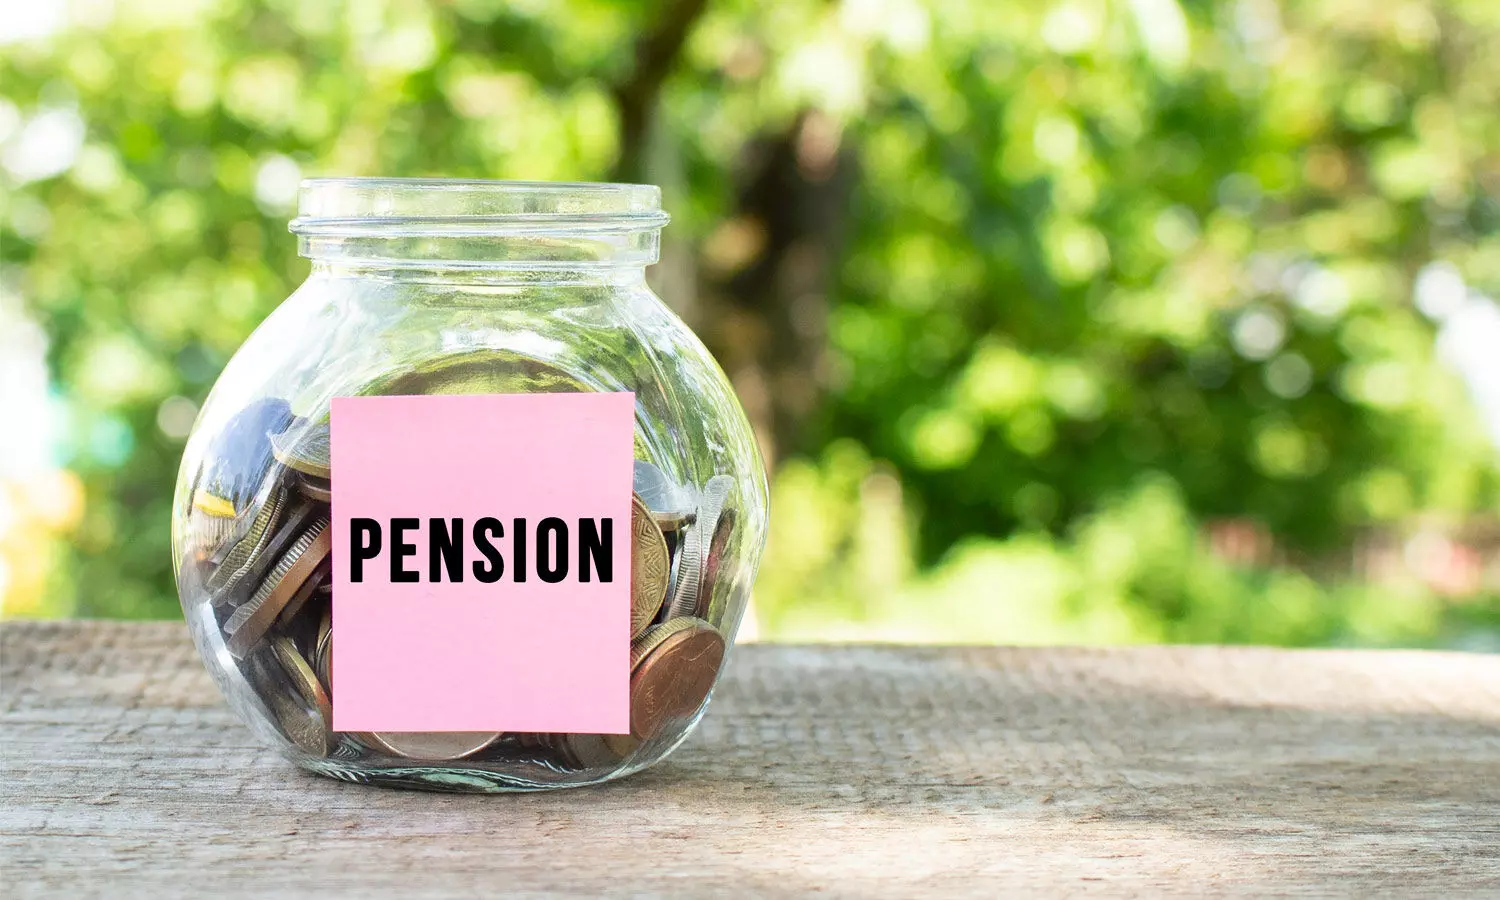 Finance Ministry rejects proposal to double minimum pension under EPS: Government decision on doubling minimum pension in EPS